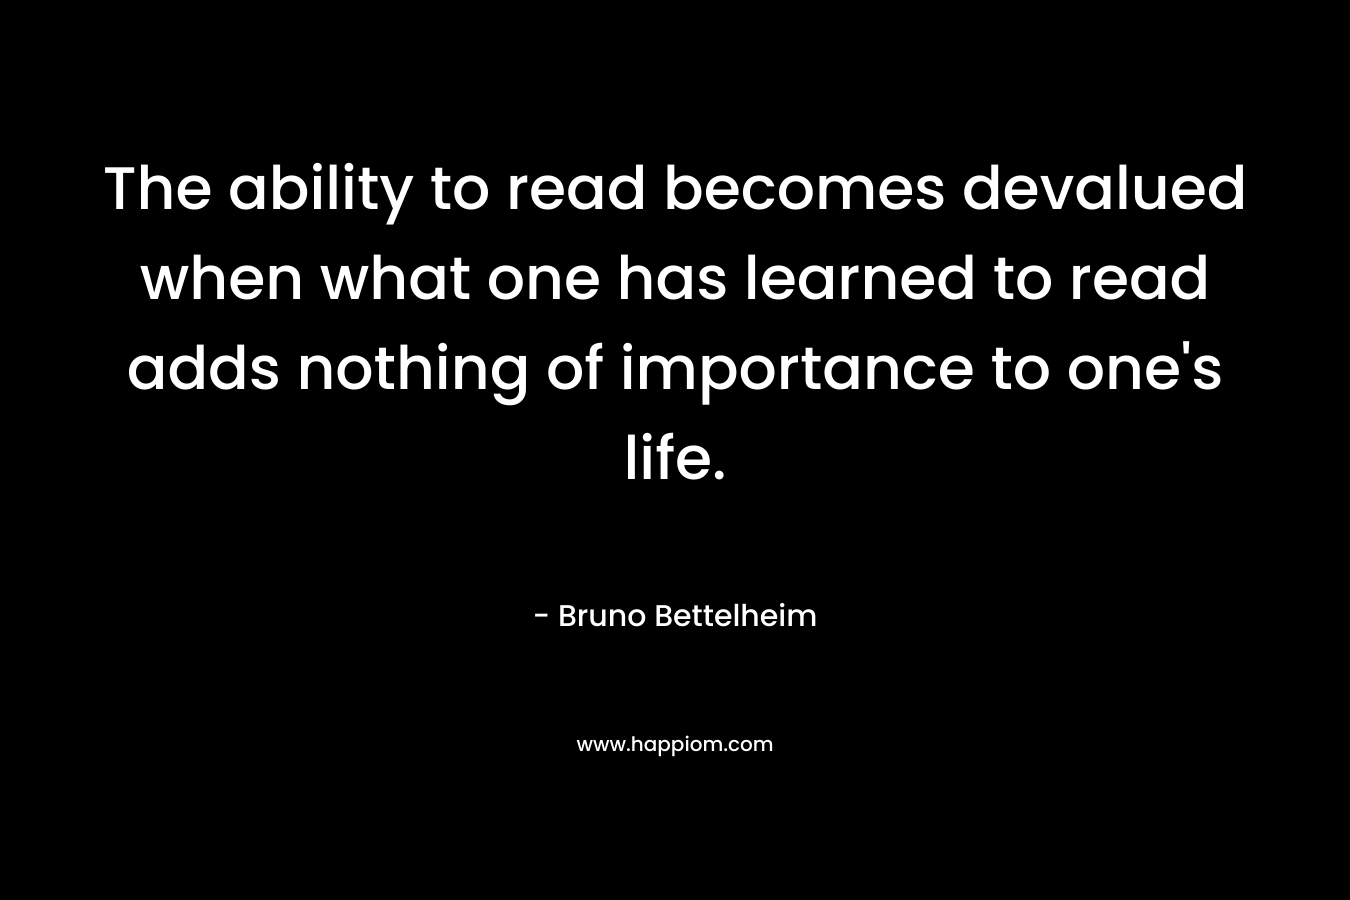 The ability to read becomes devalued when what one has learned to read adds nothing of importance to one's life.